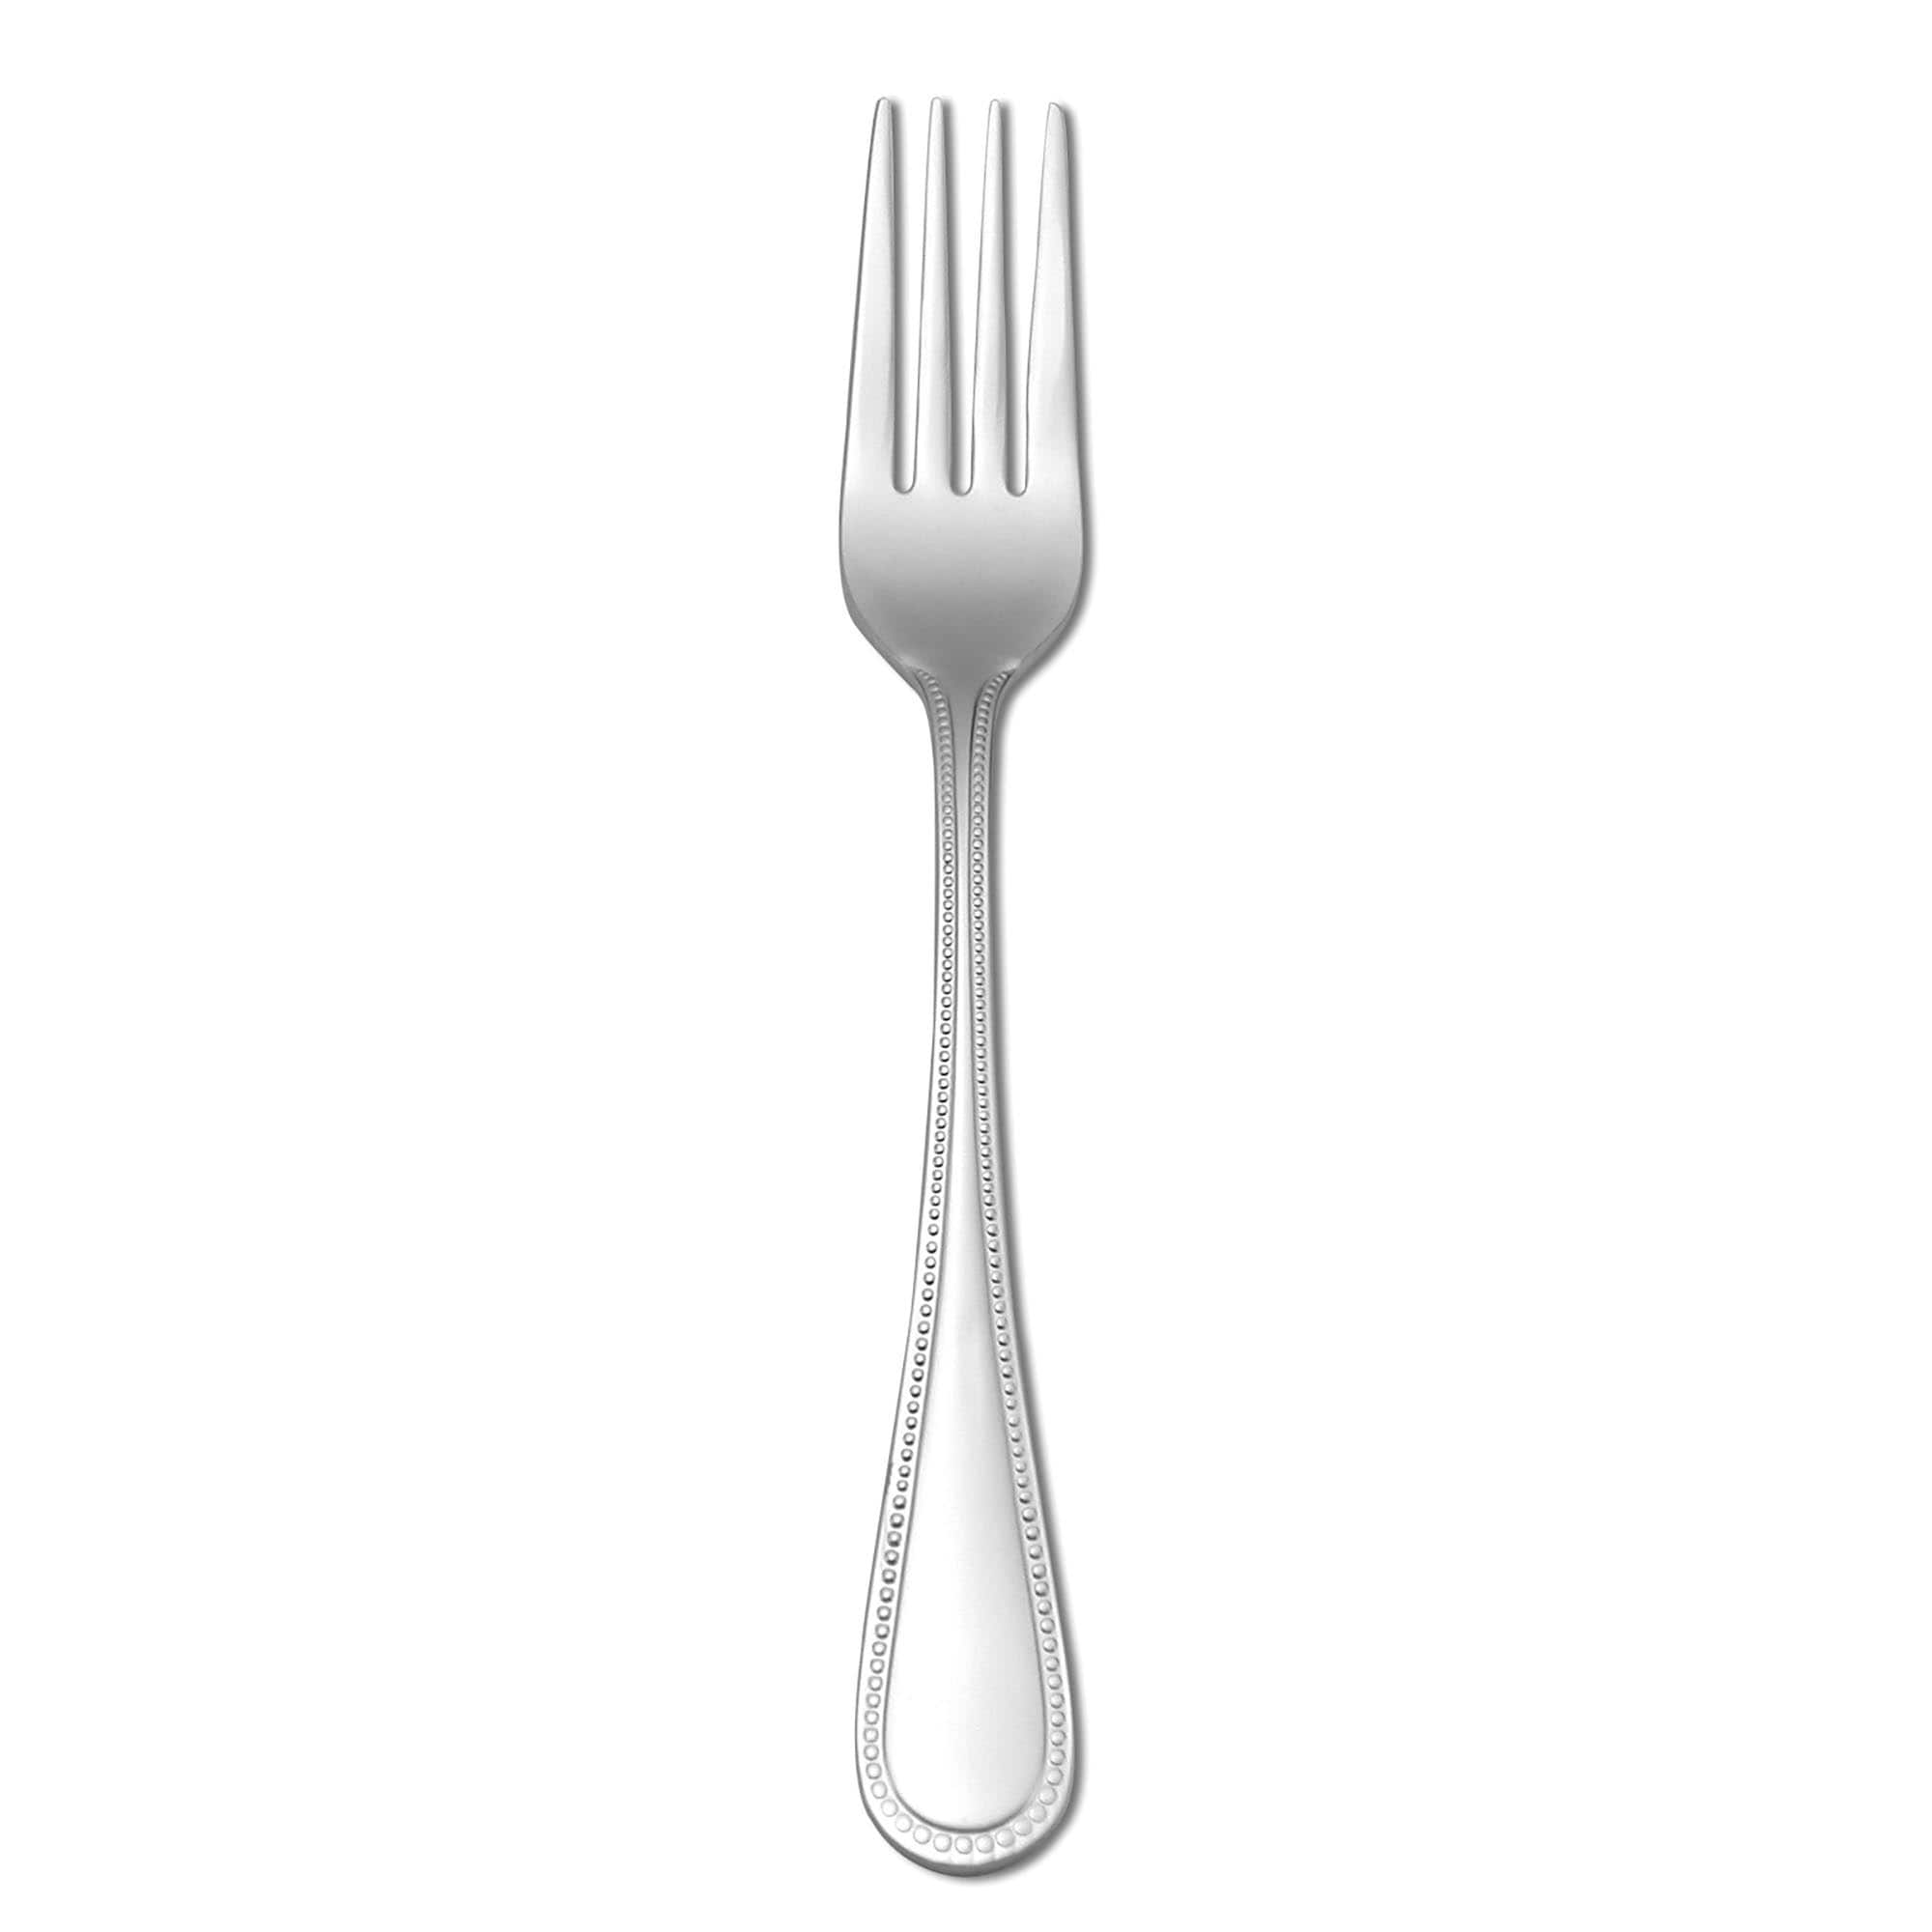 https://ak1.ostkcdn.com/images/products/is/images/direct/38ee7e7bf782a85807eb09908bf12a17c138ce56/Oneida-18-10-Stainless-Steel-Pearl-Dinner-Forks-%28Set-of-12%29.jpg